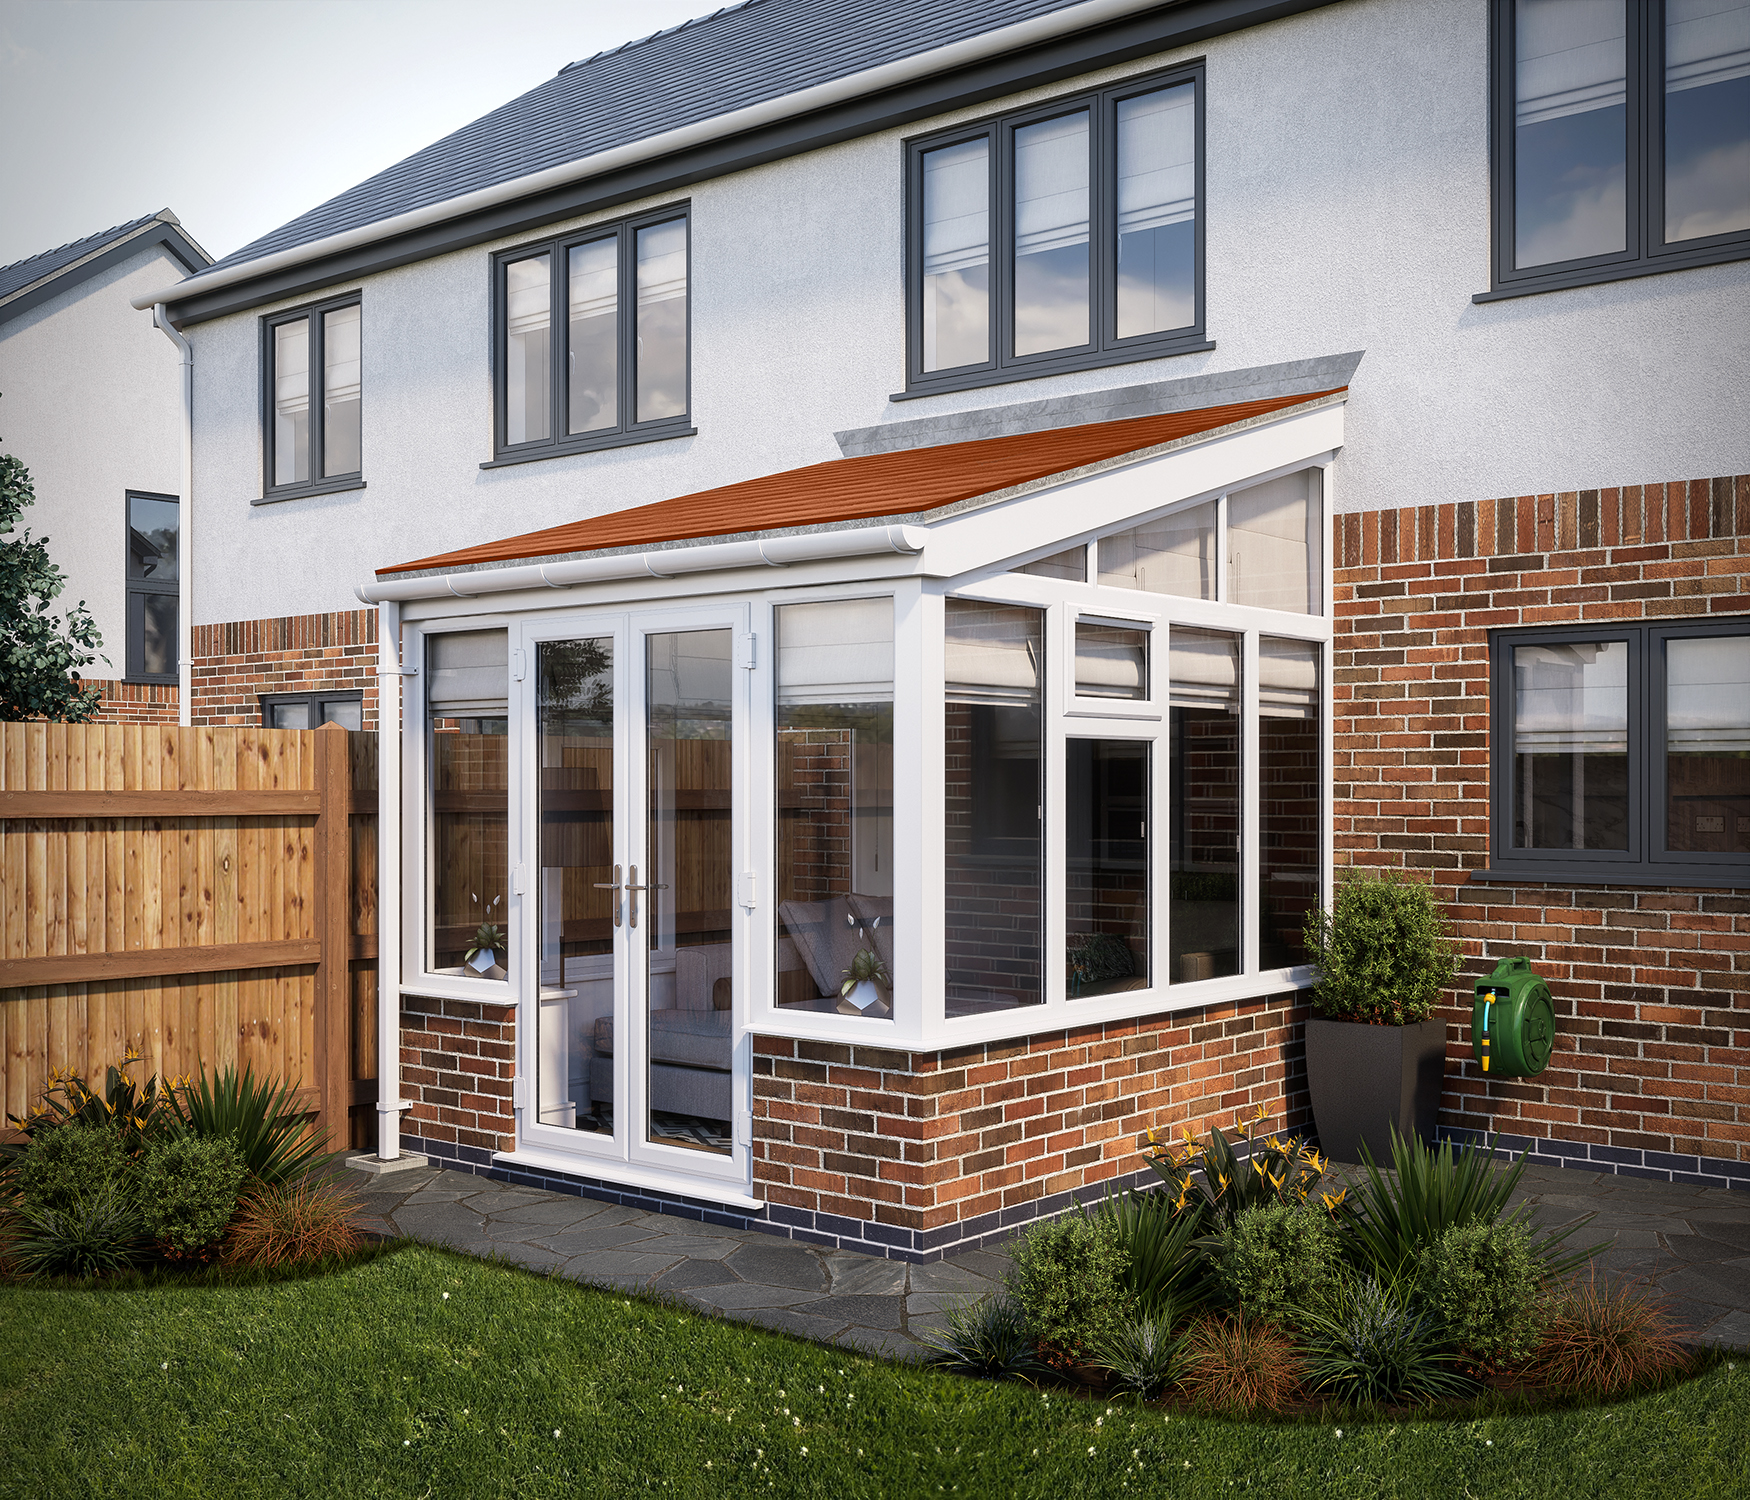 Image of SOLid Roof Lean to Conservatory White Frames Dwarf Wall with Rustic Terracotta Tiles - 13 x 13ft